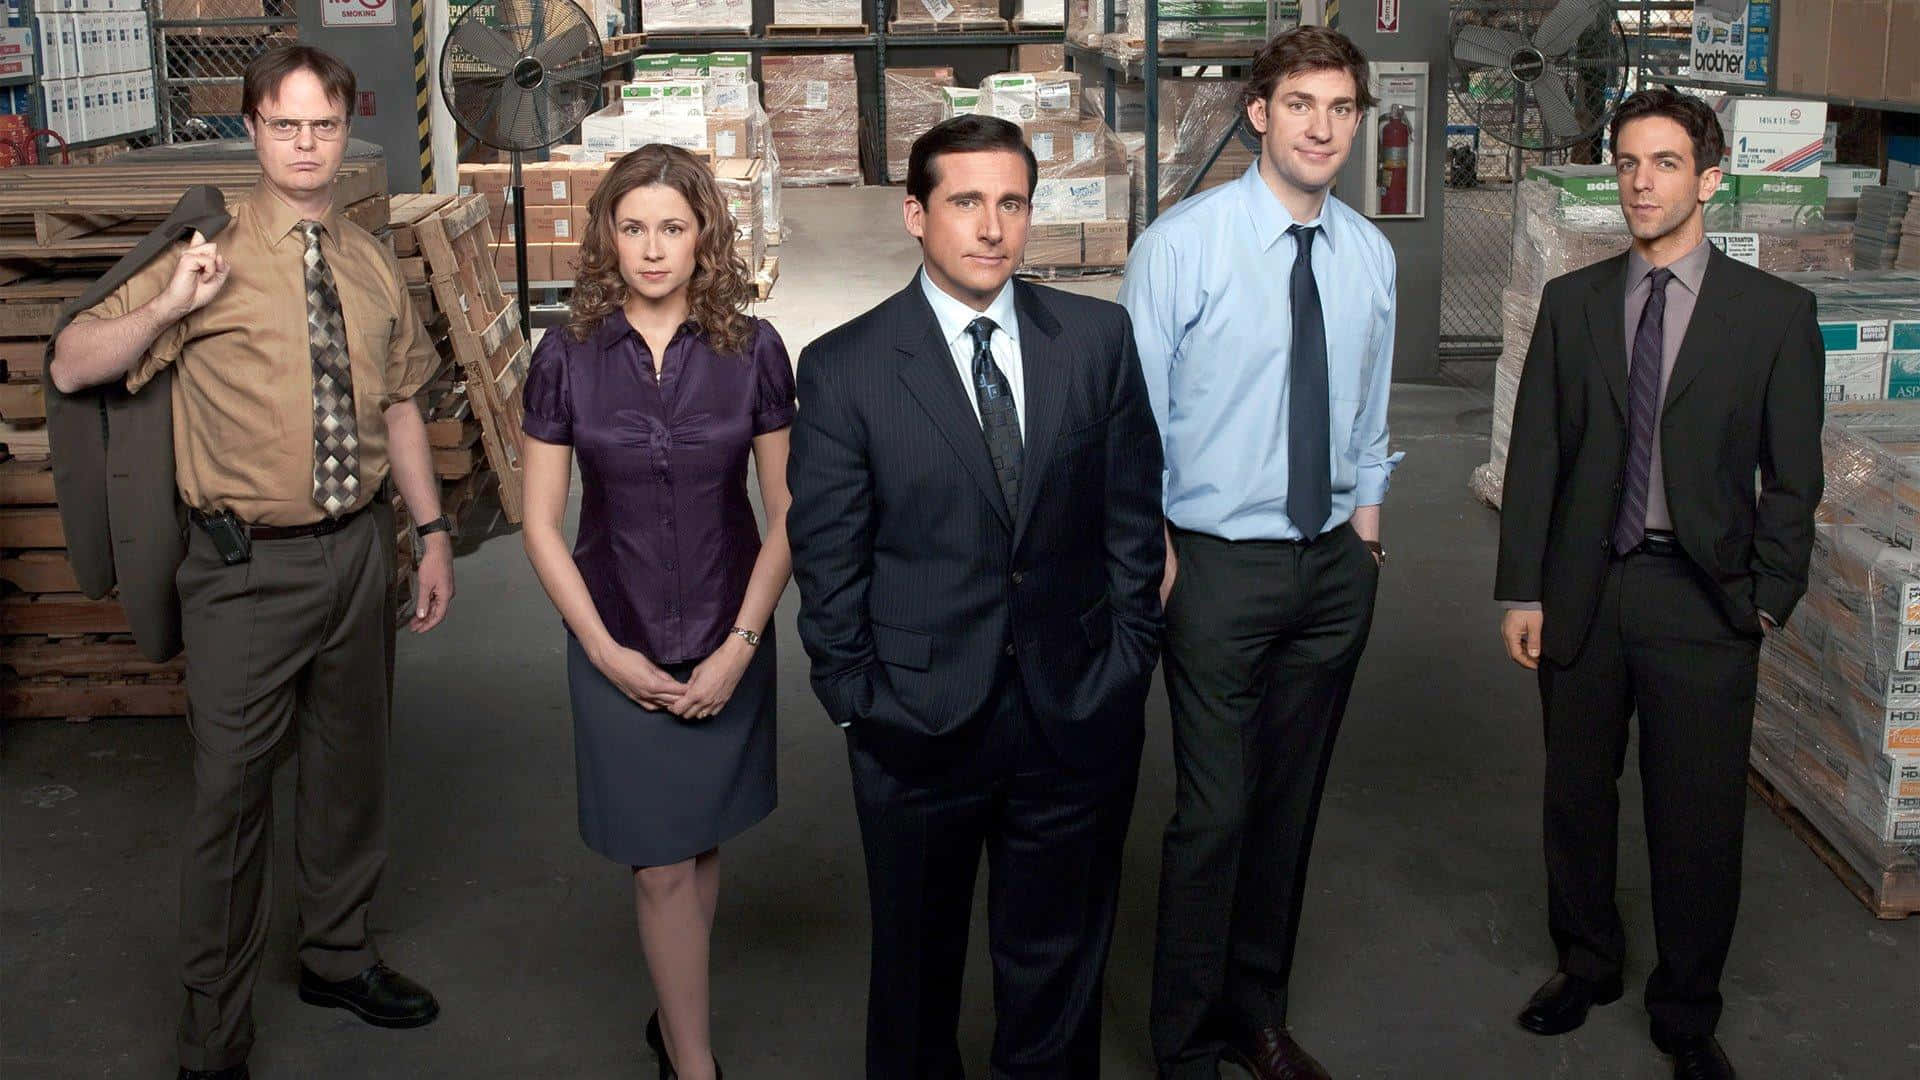 Michael Scott, the Most Memorable Character from 'The Office' Wallpaper